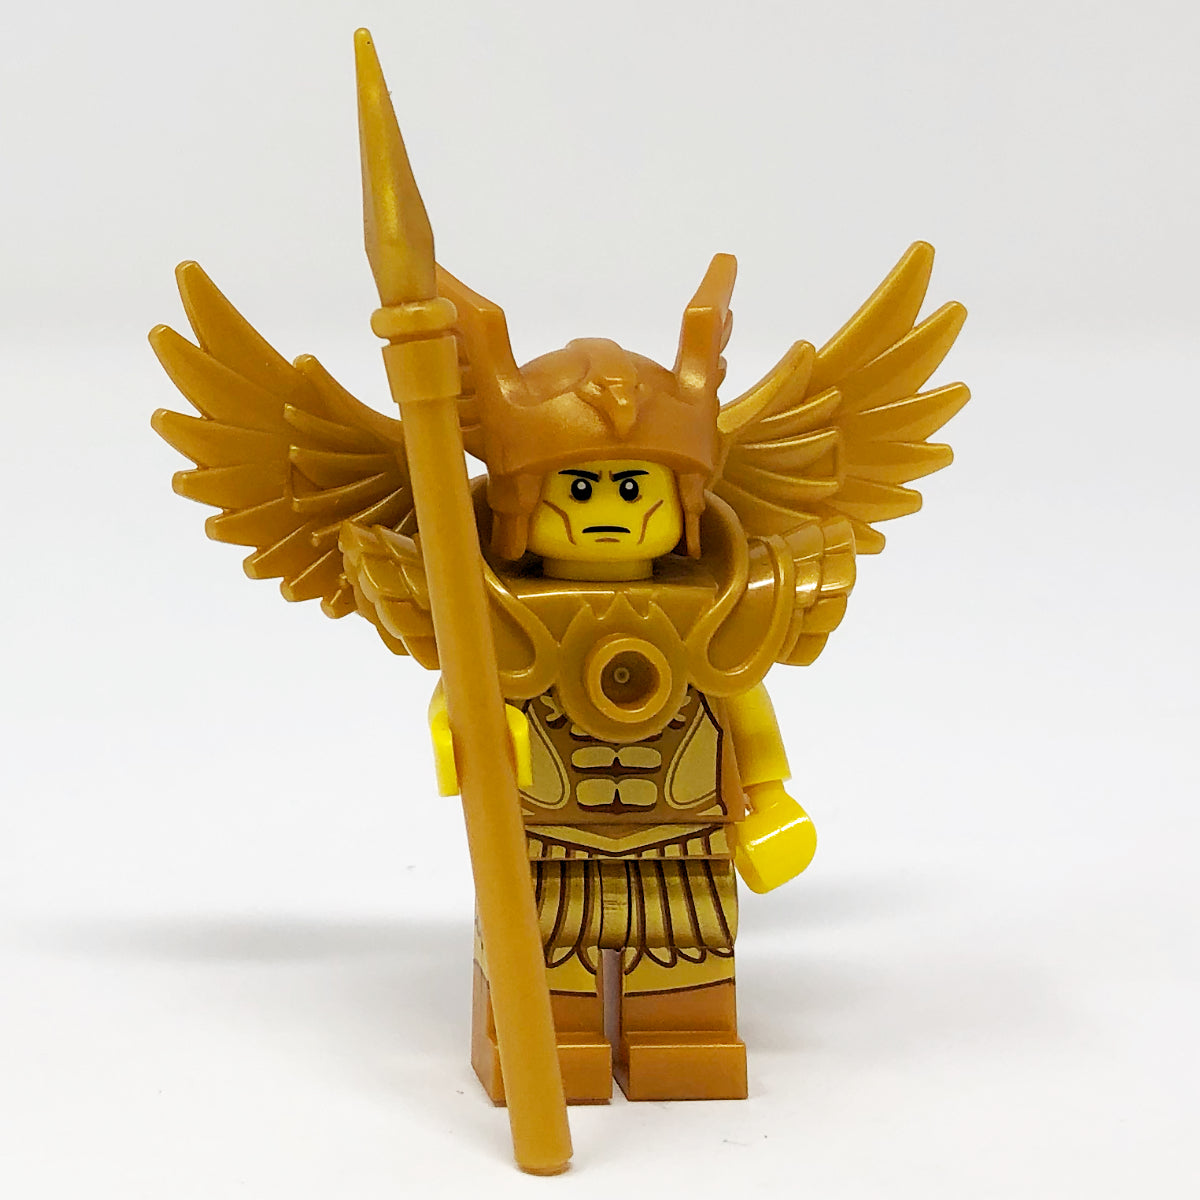 S15 Flying Warrior - Series 15 Minifigure (col233)